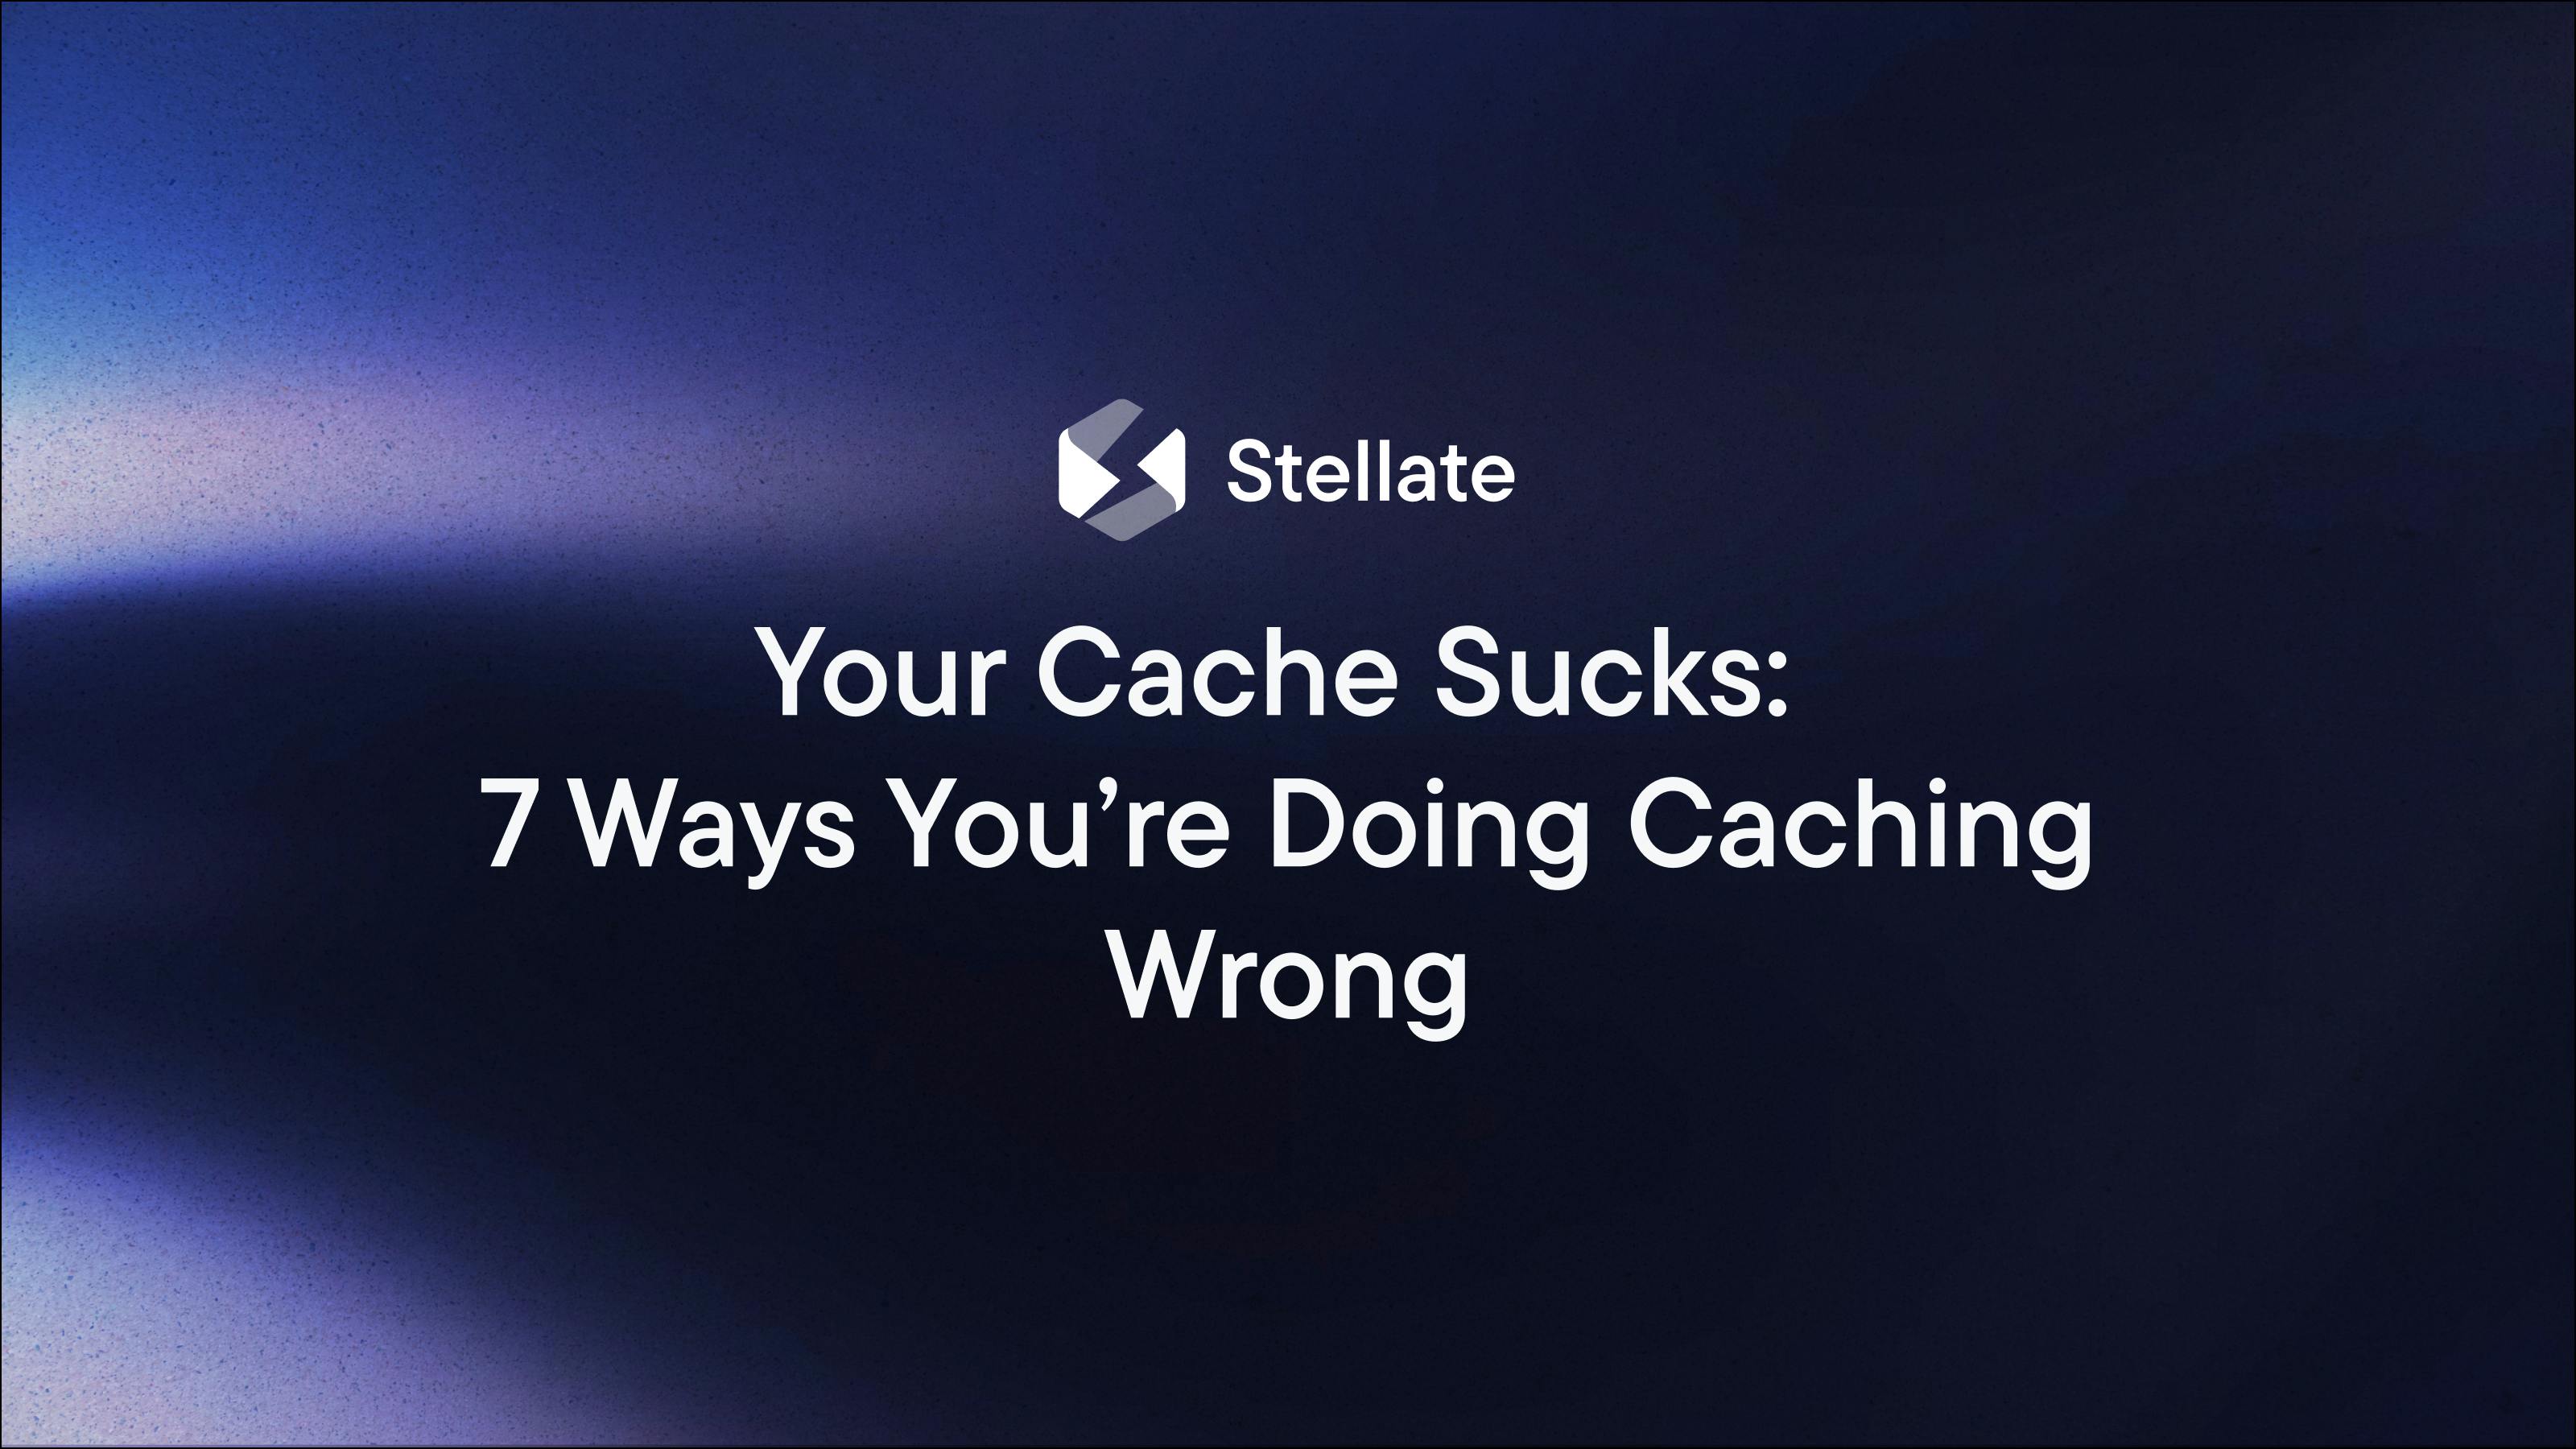 Your Cache Sucks: 7 Ways You’re Doing Caching Wrong